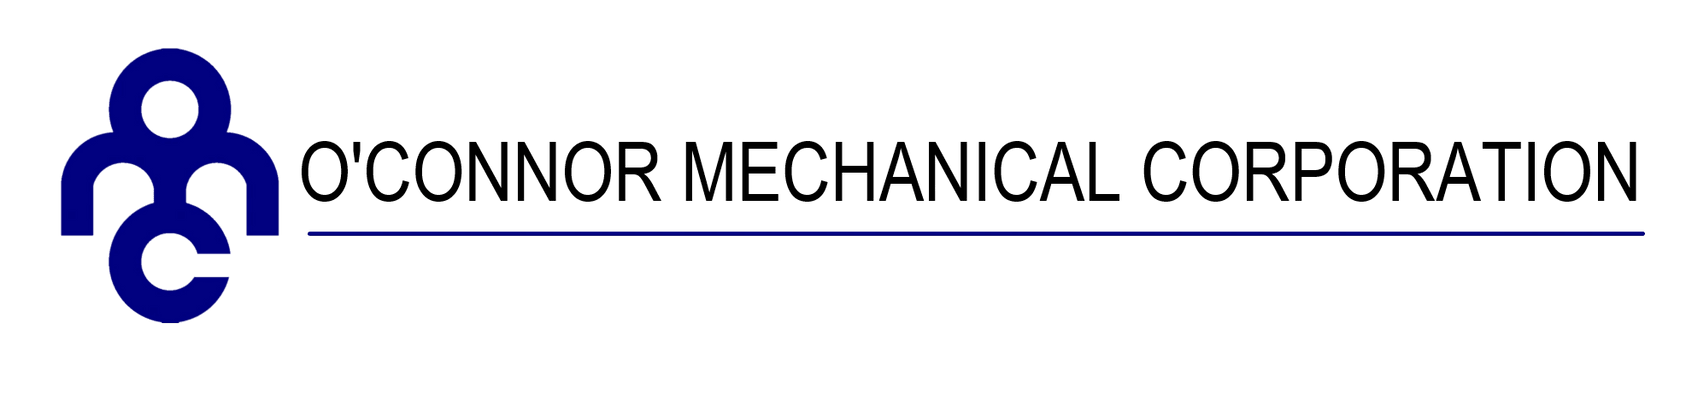 Mechanical Contracting in Buffalo - O'Connor Mechanical Corporation